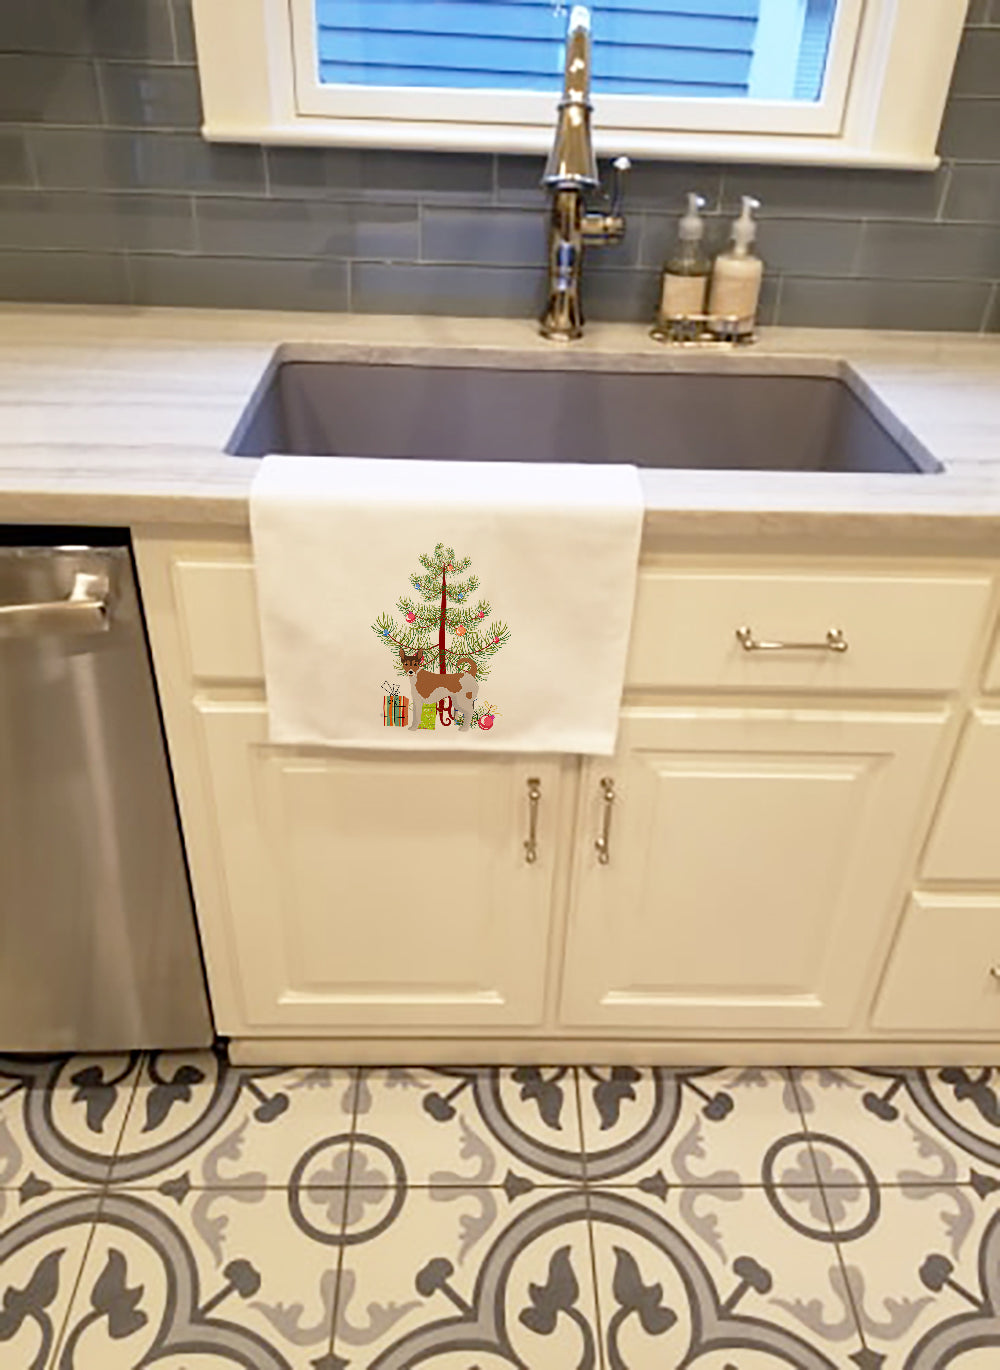 Buy this Tenterfield Terrier Christmas Tree White Kitchen Towel Set of 2